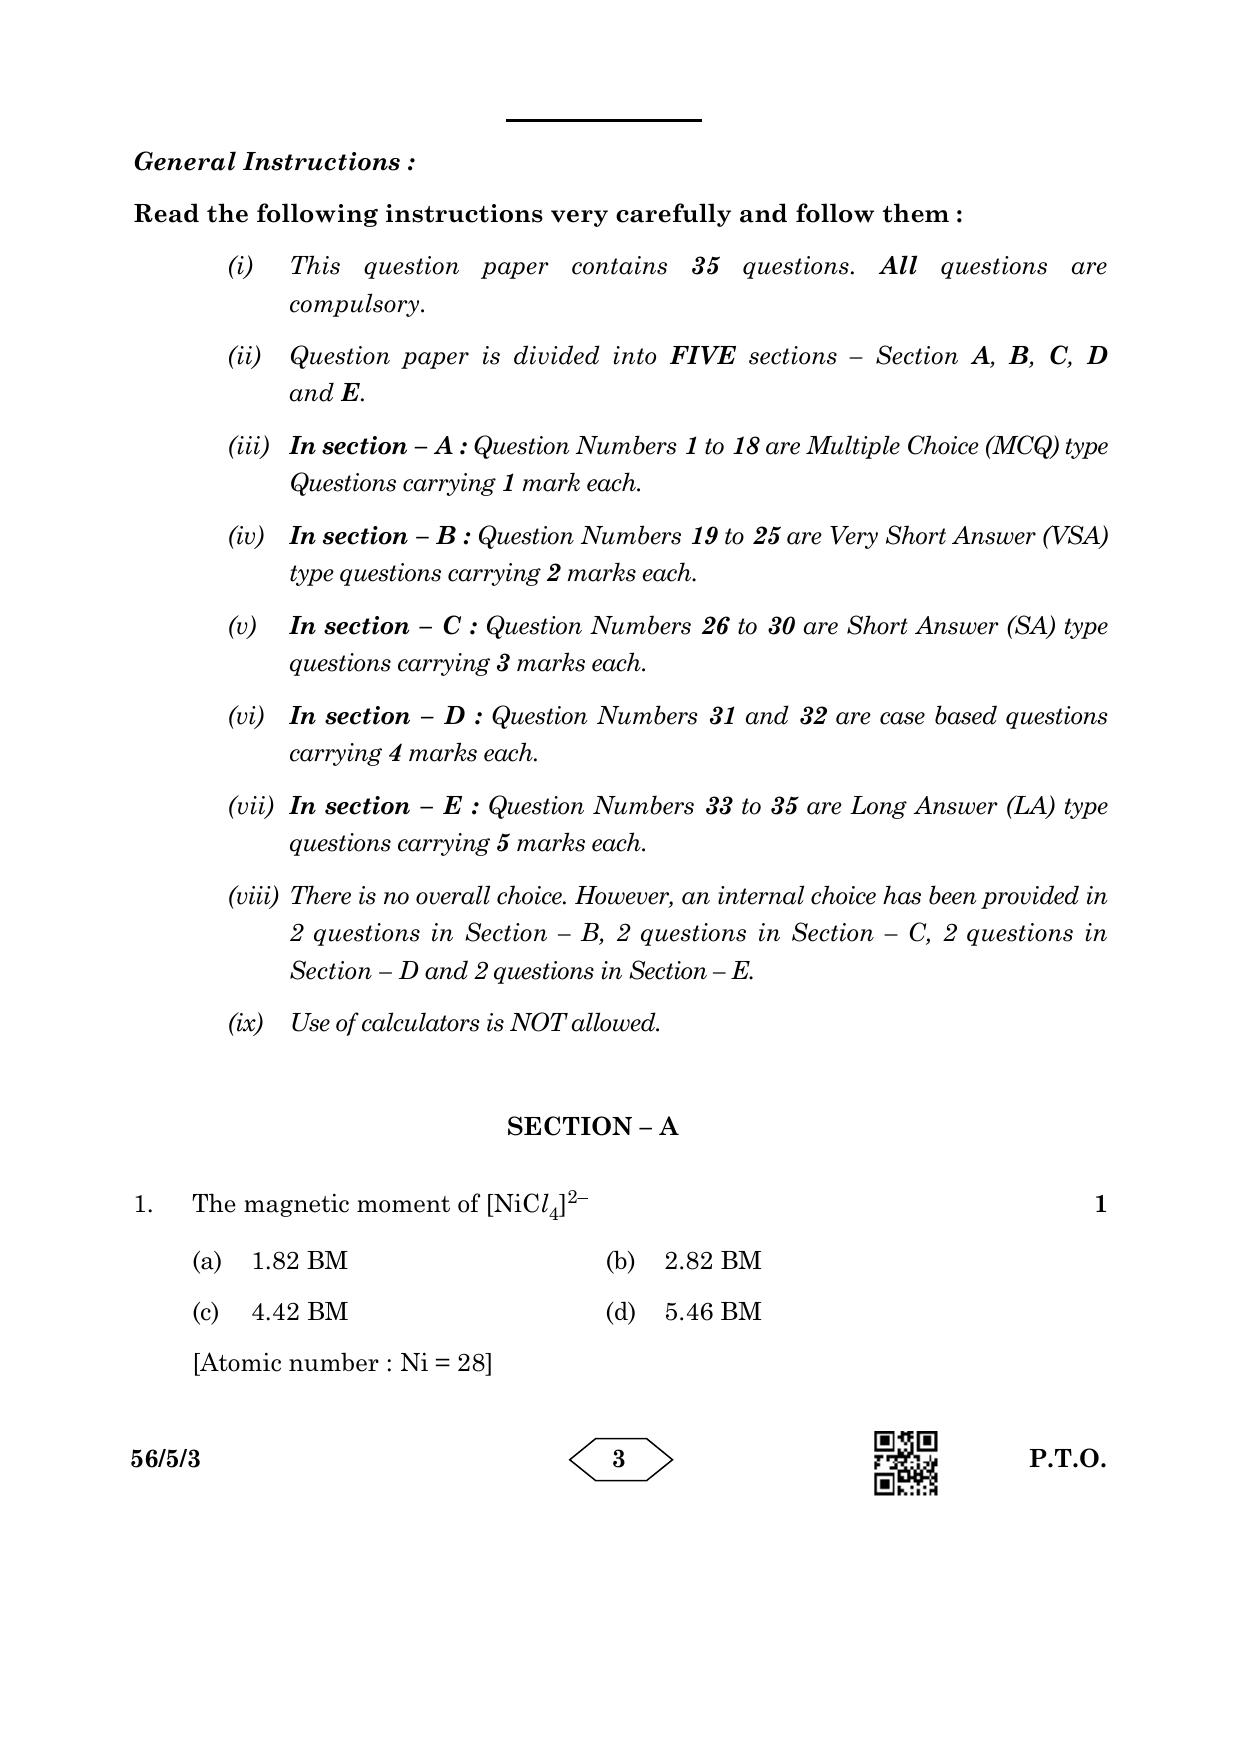 CBSE Class 12 56-5-3 Chemistry 2023 Question Paper - Page 3